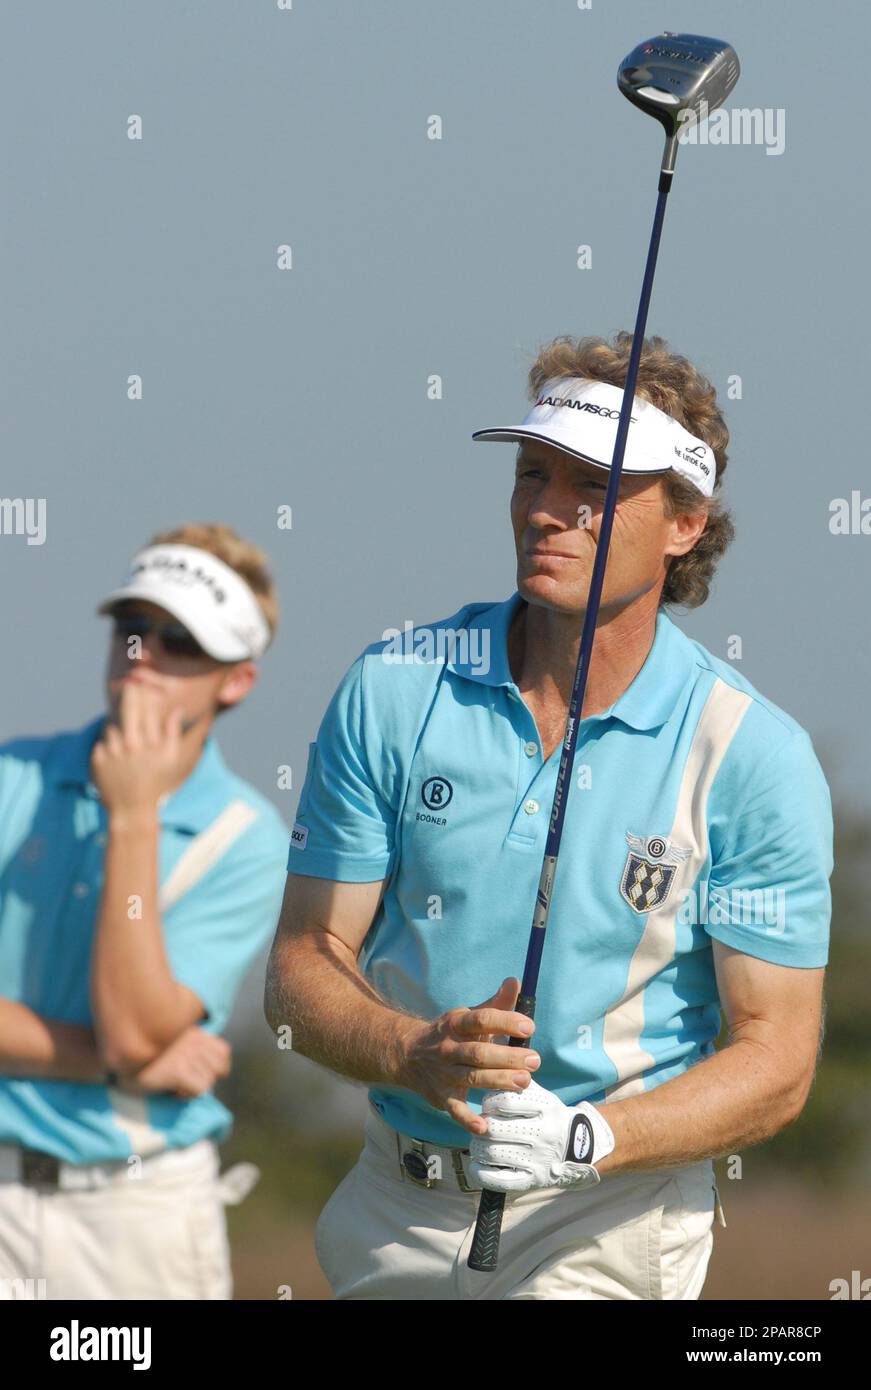 Stefan Langer, right, and his father, Bernhard Langer, of Germany, watch  his tee shot on the 15th hole during the final round of the Del Webb  Father/Son Challenge at ChampionsGate golf tournament